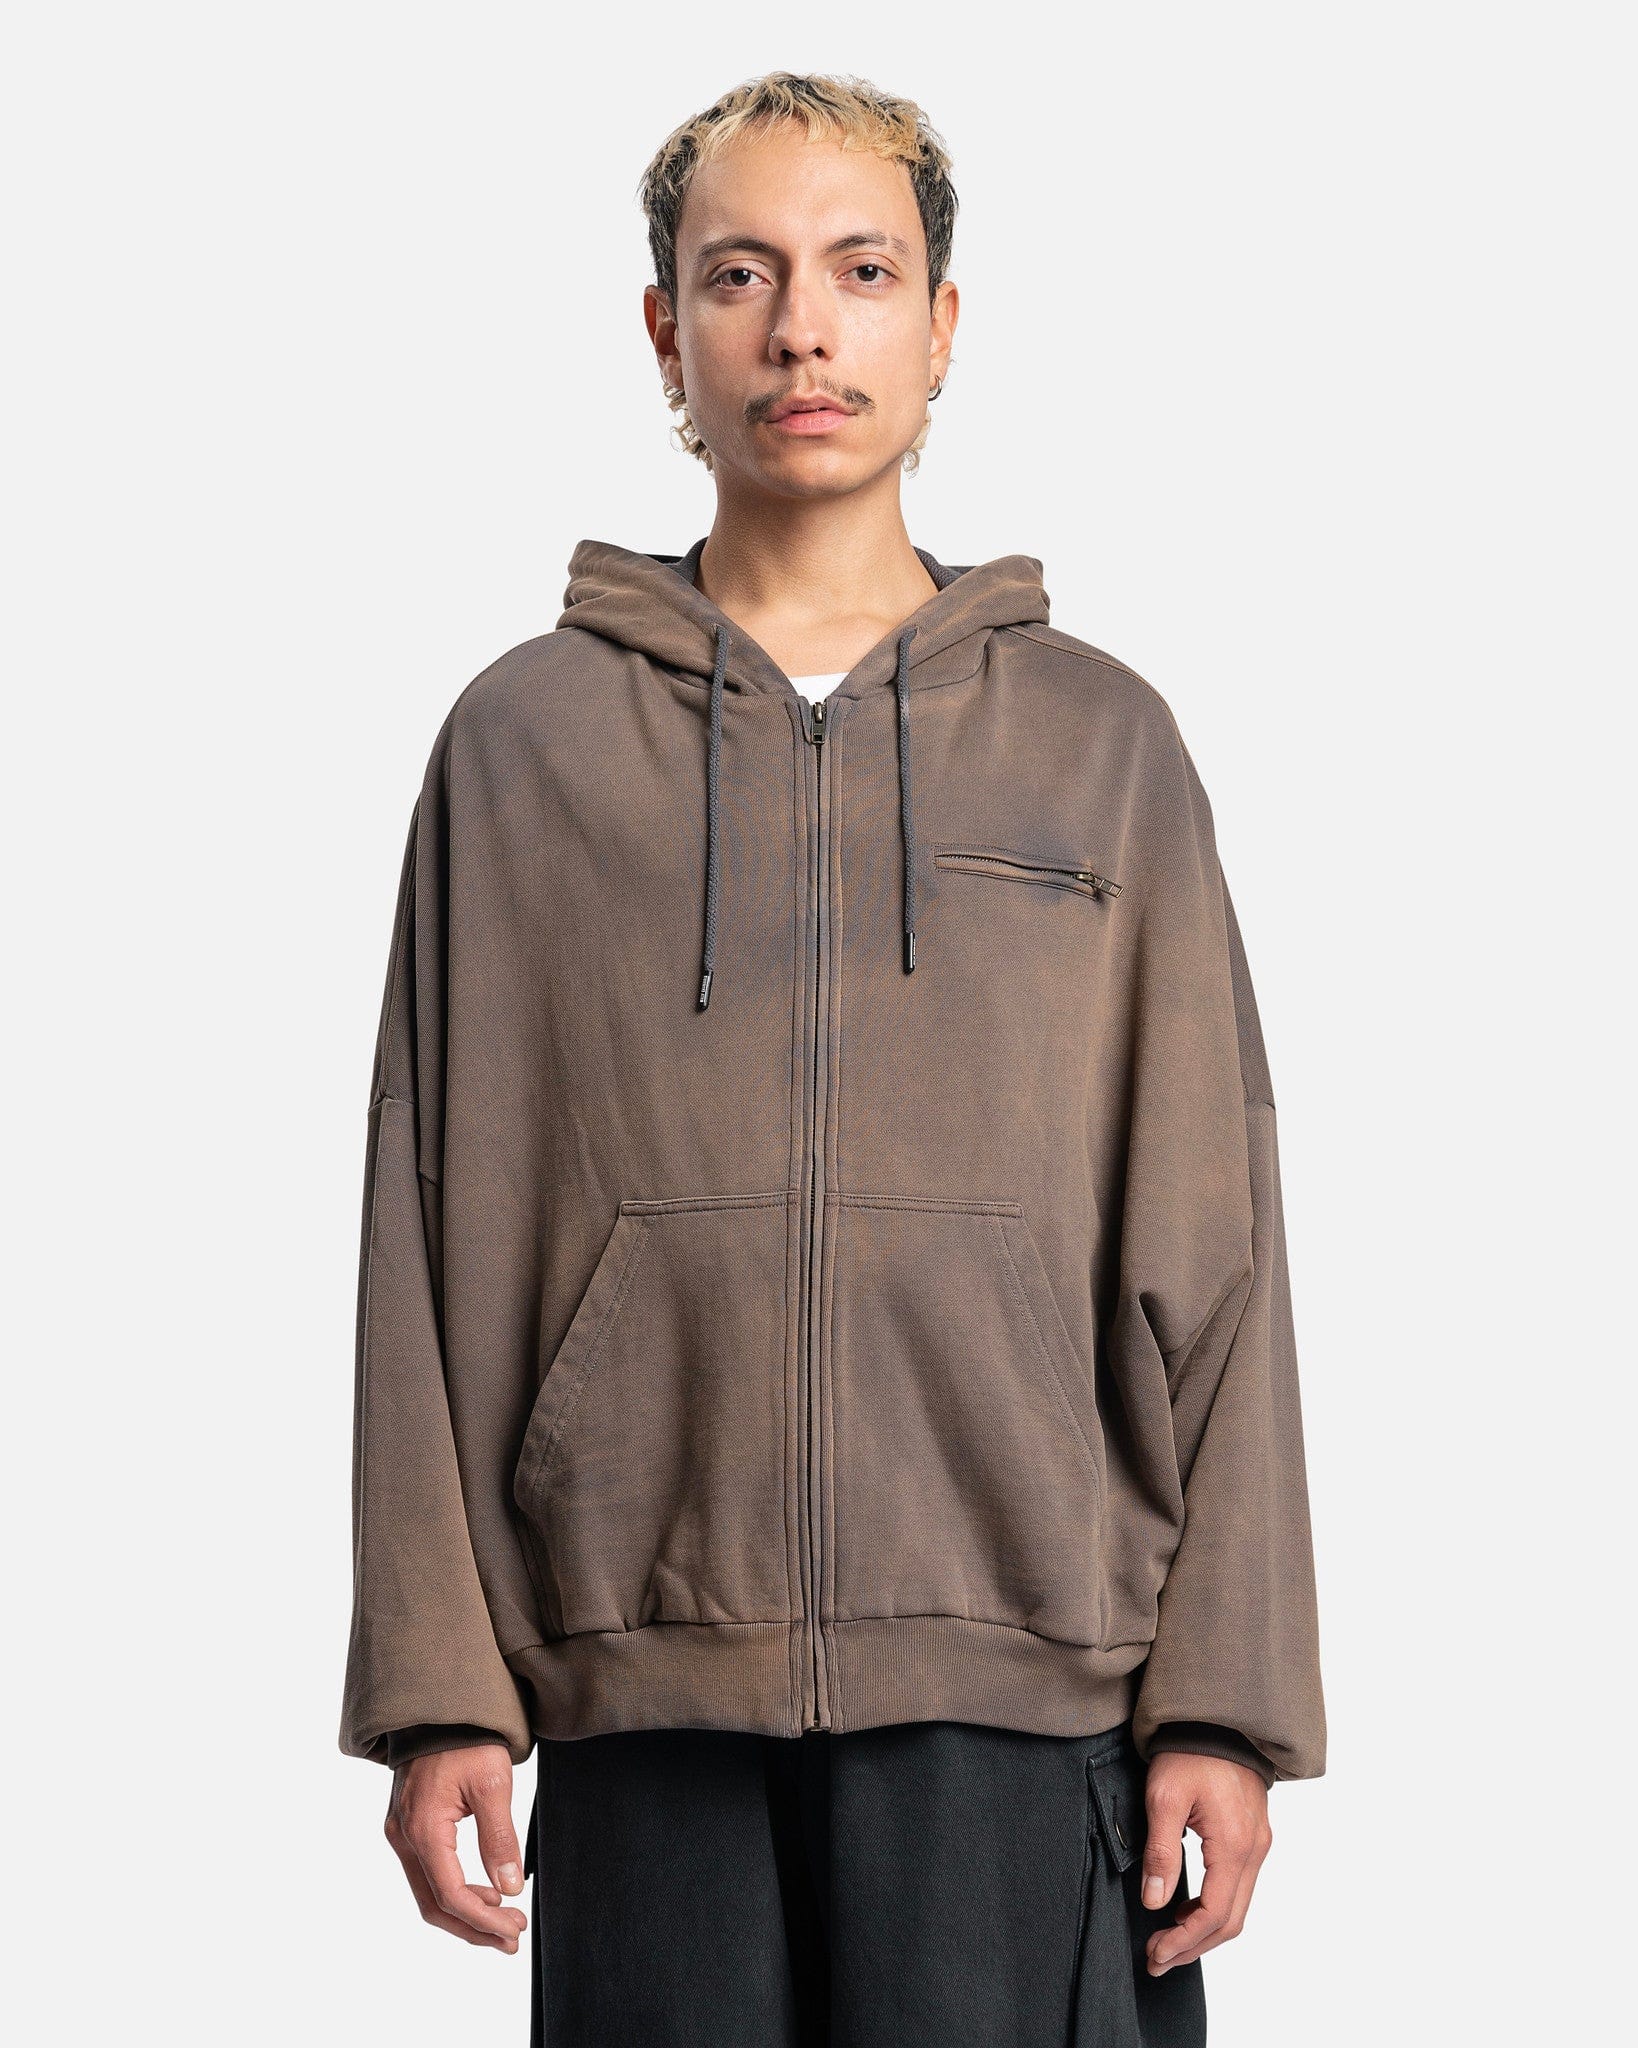 Willy Chavarria Men's Sweatshirts Waffle Lined Zip Hoodie in Pavement